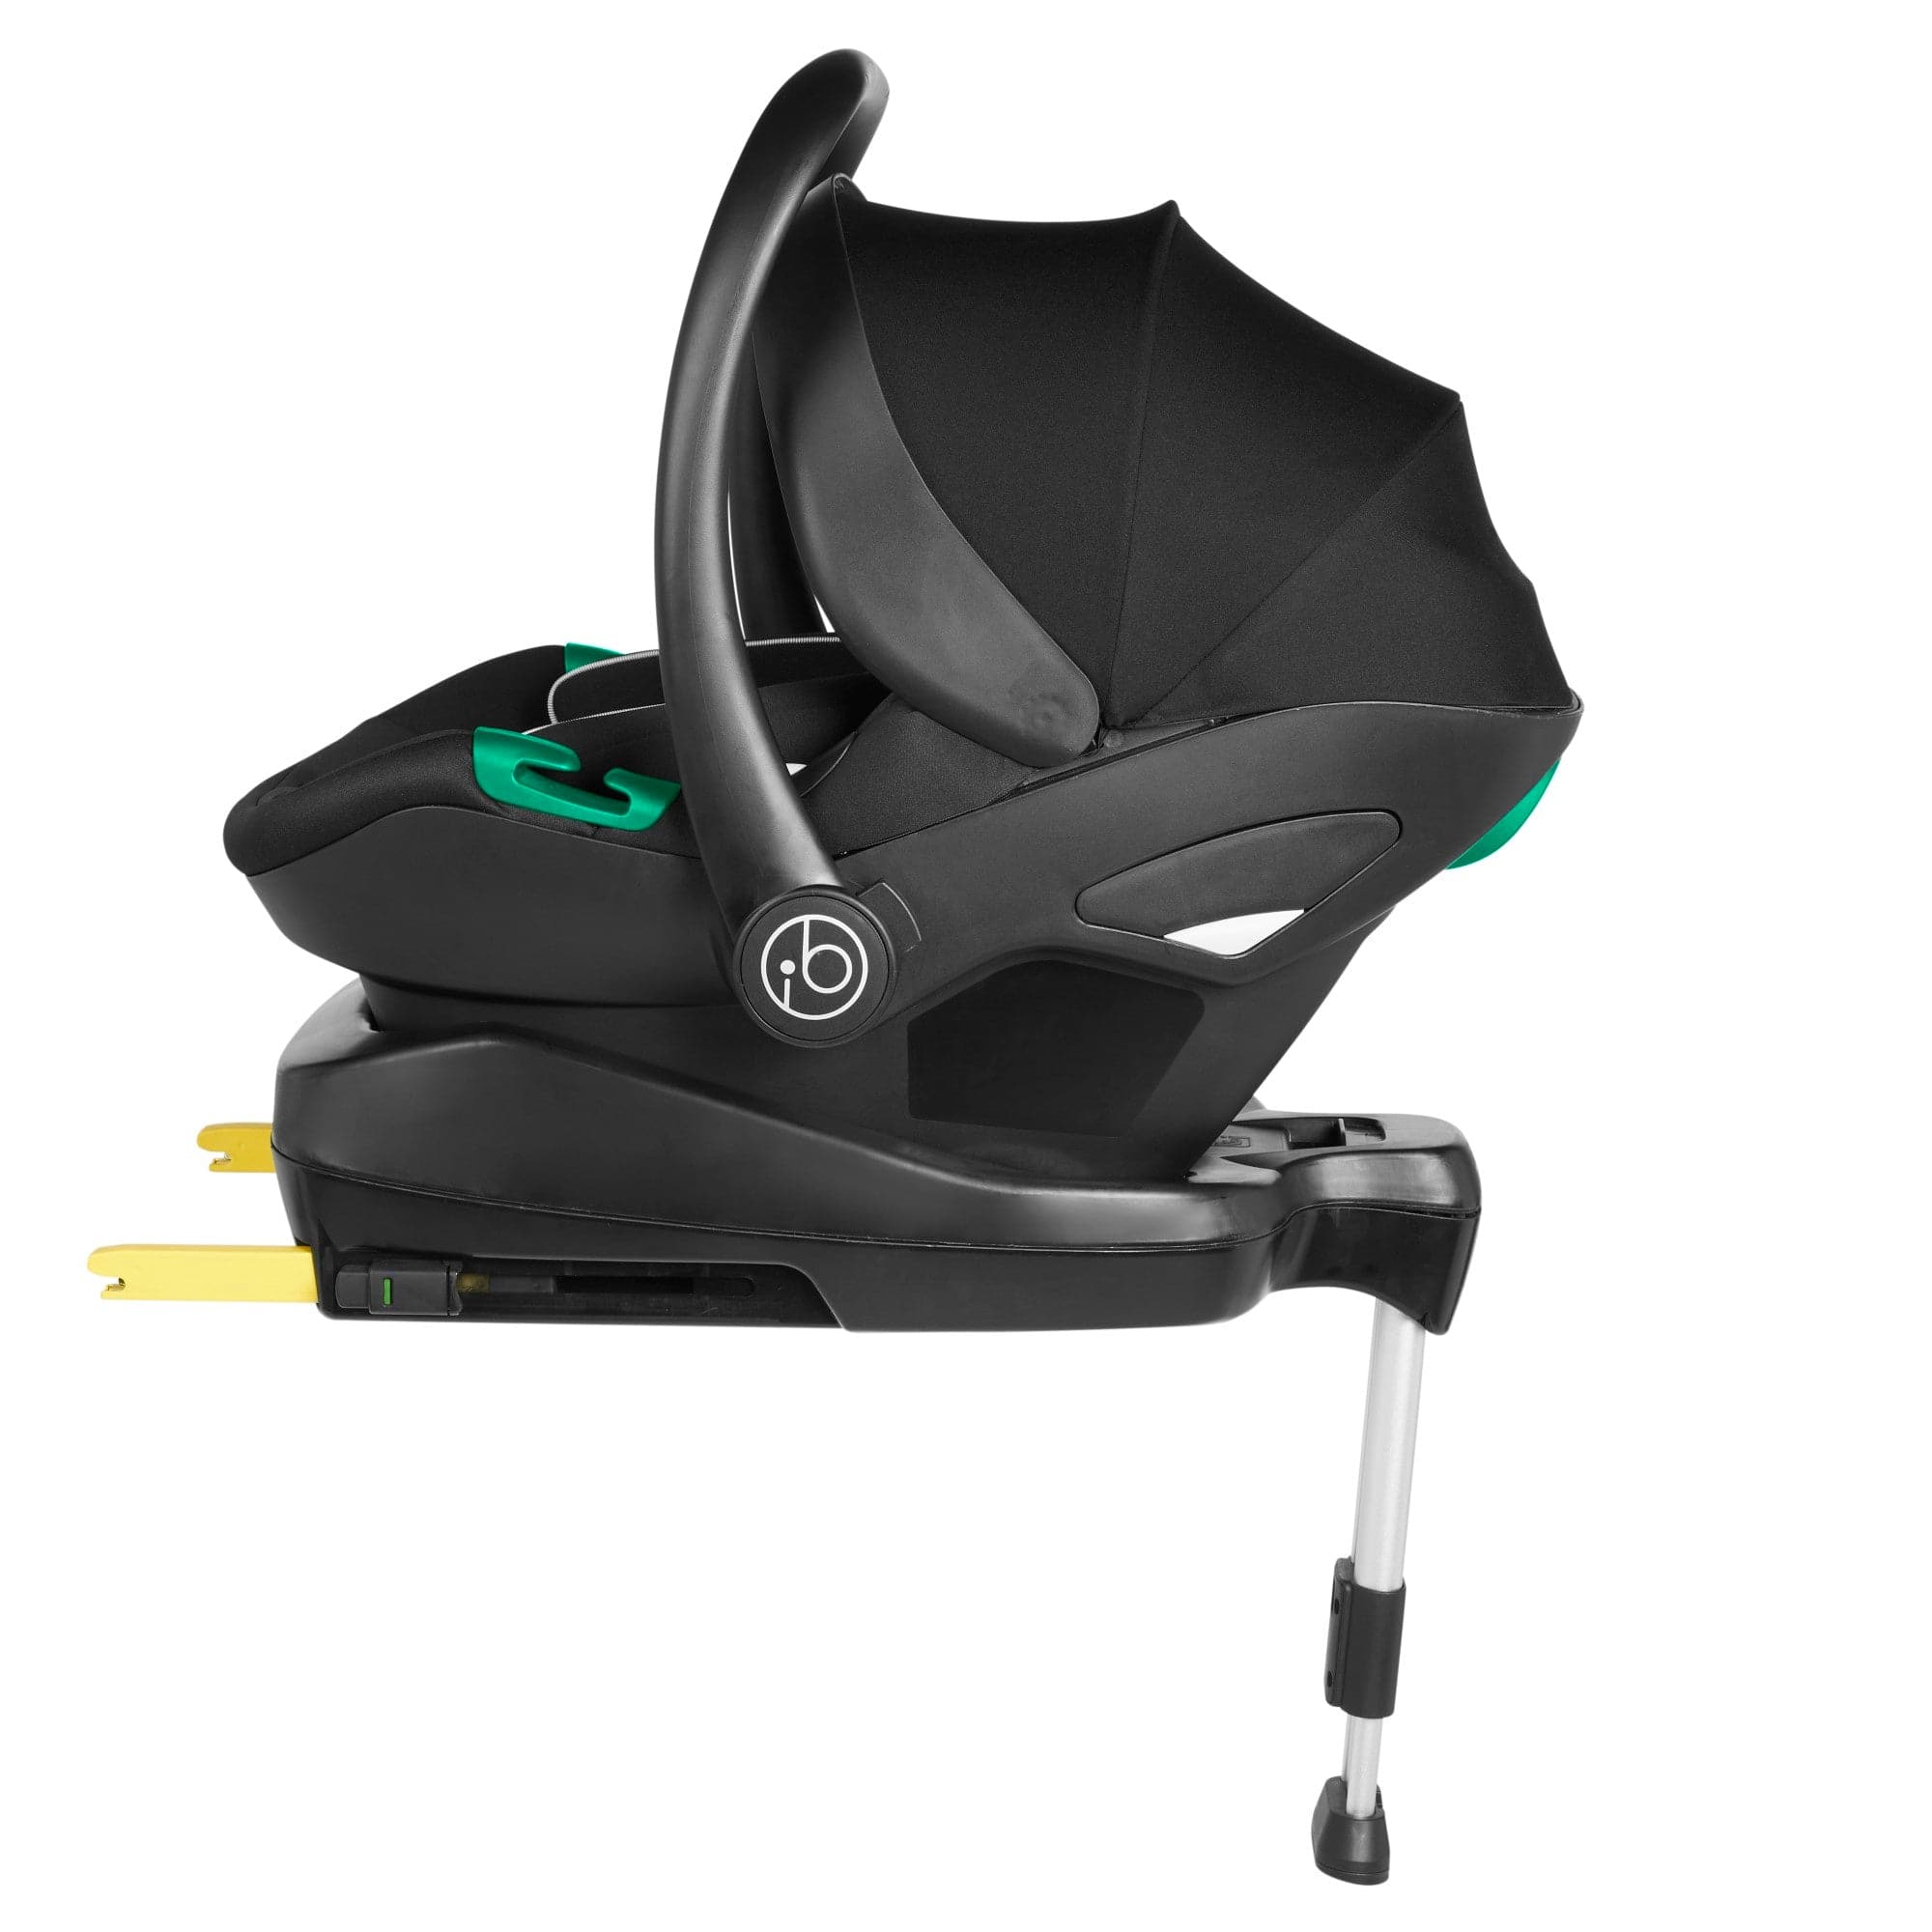 Ickle Bubba Cosmo I-Size Travel System With Stratus Car Seat & Isofix Base - Desert -  | For Your Little One